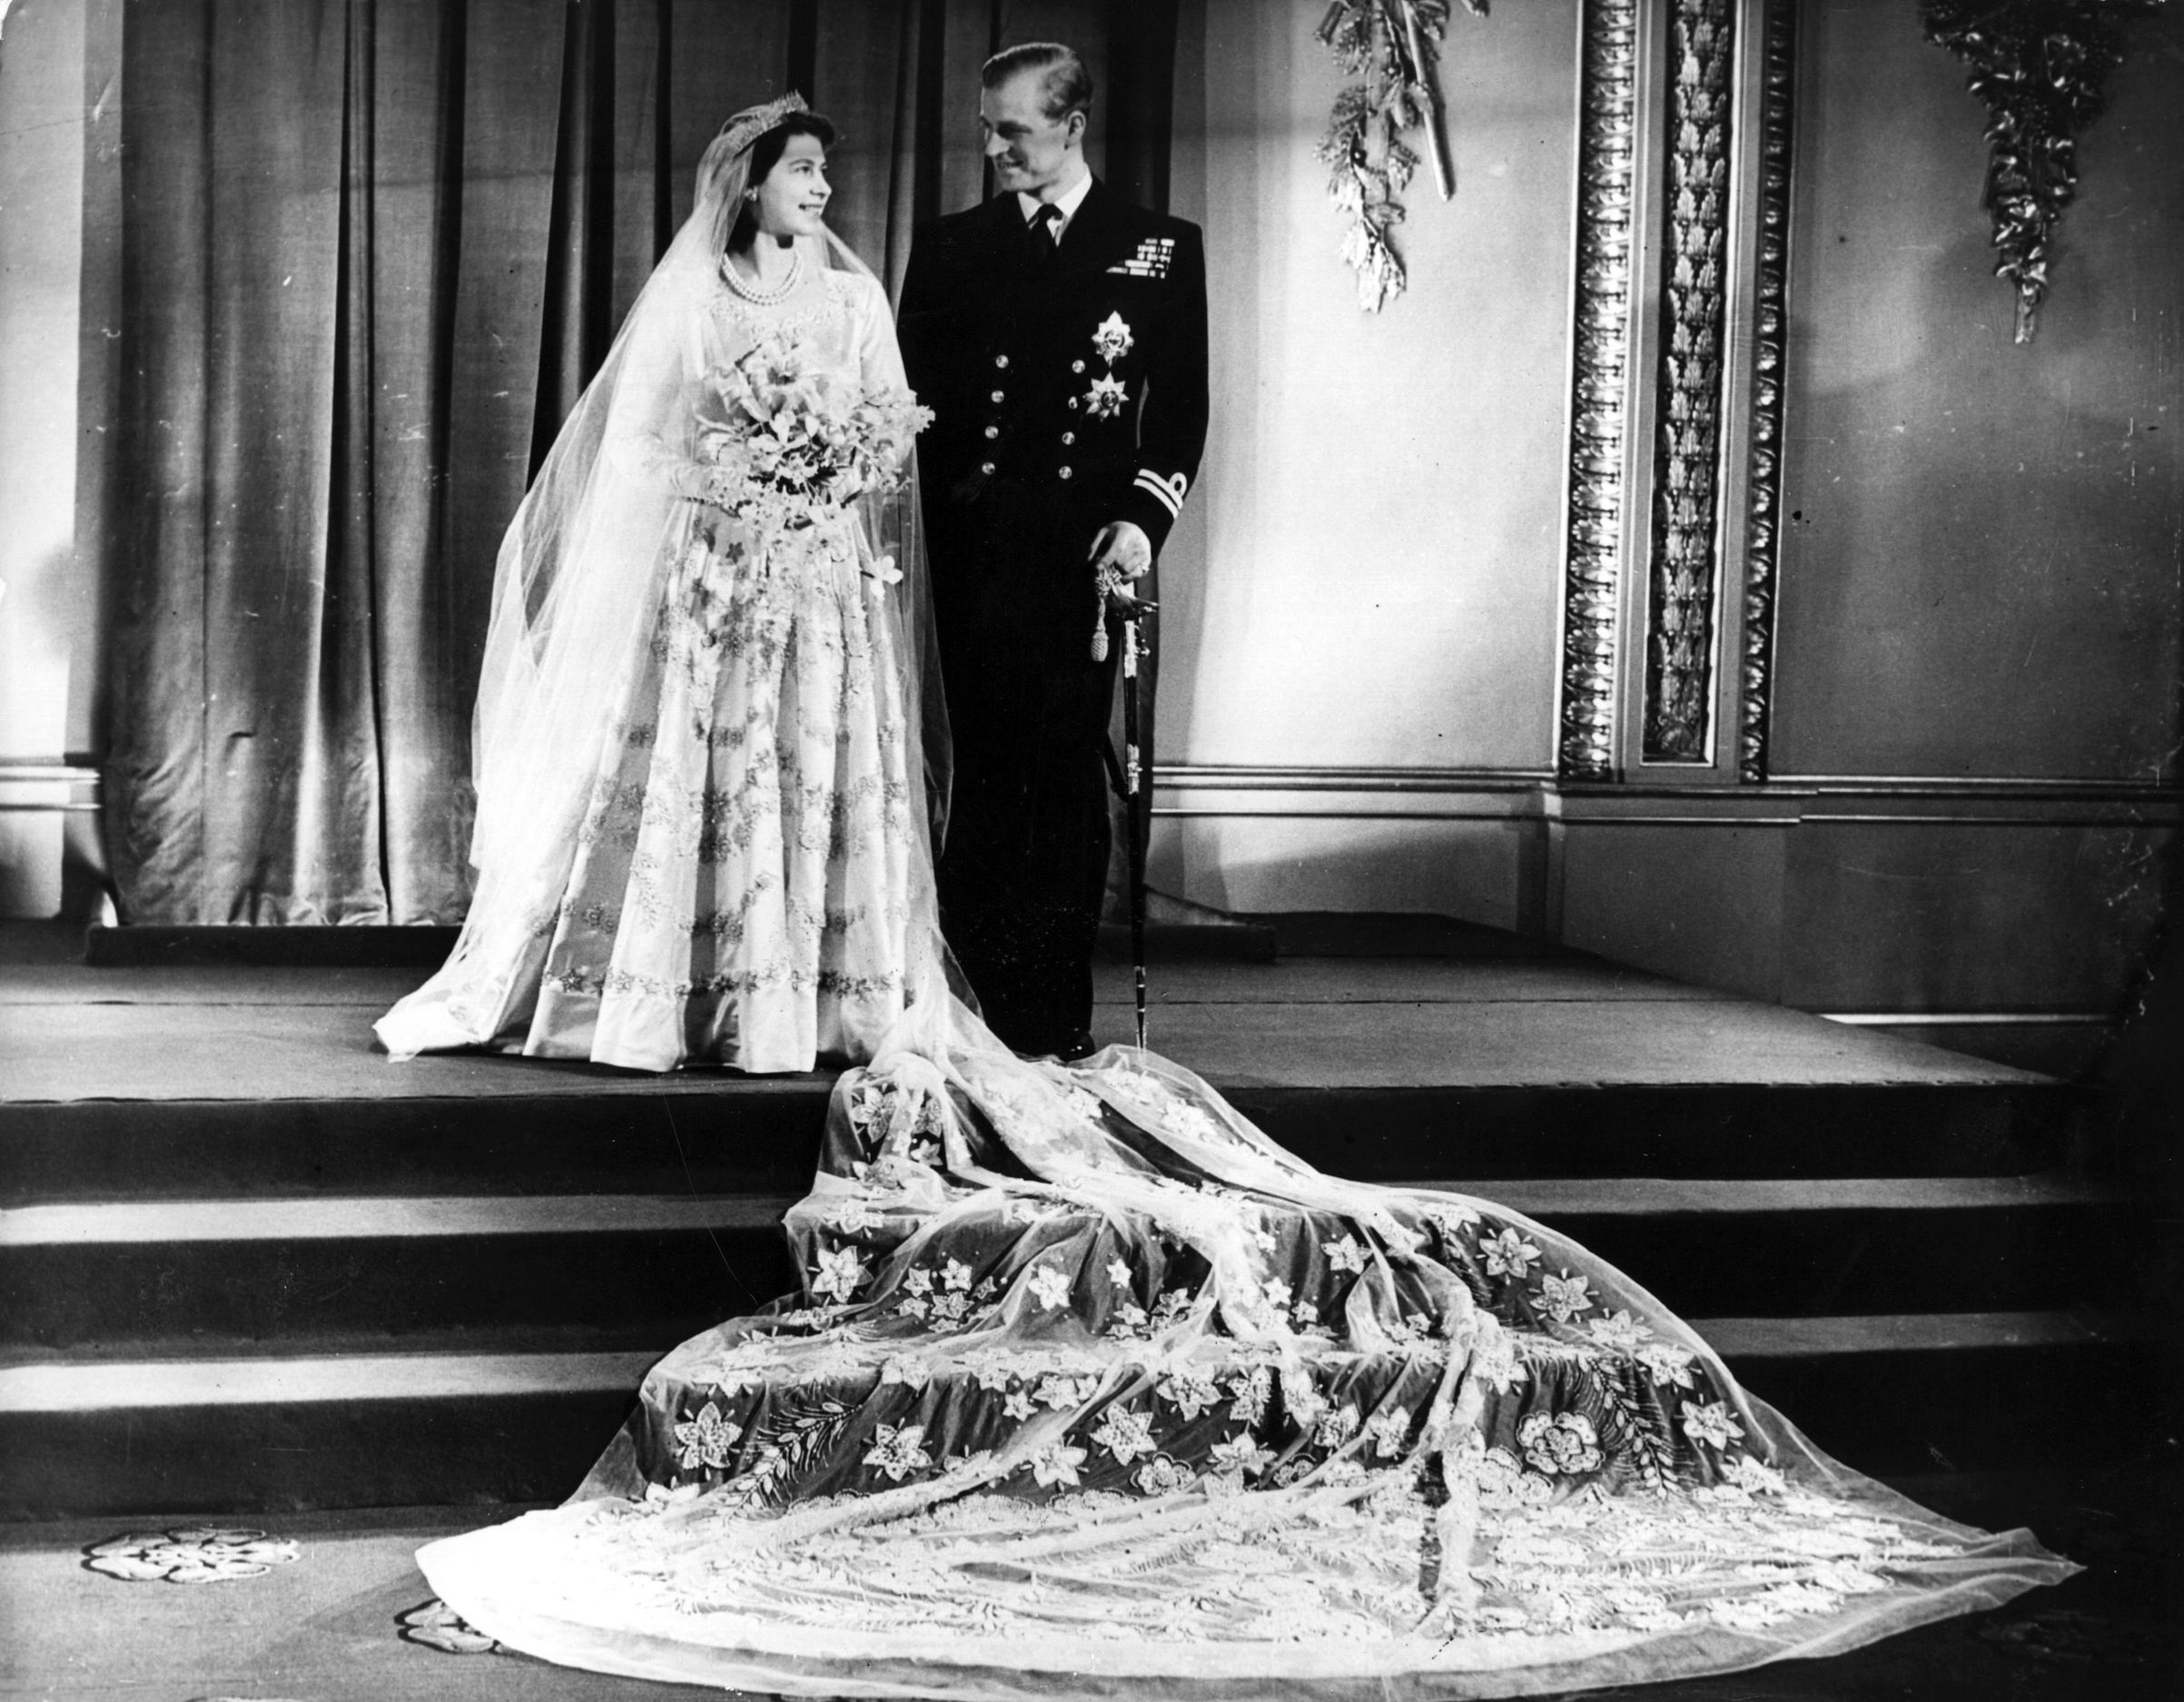 Princess Elizabeth and the Prince, Philip Duke of Edinburgh, at Buckingham Palace after their wedding on Nov. 20, 1947 (Hulton Archive/Getty Images)